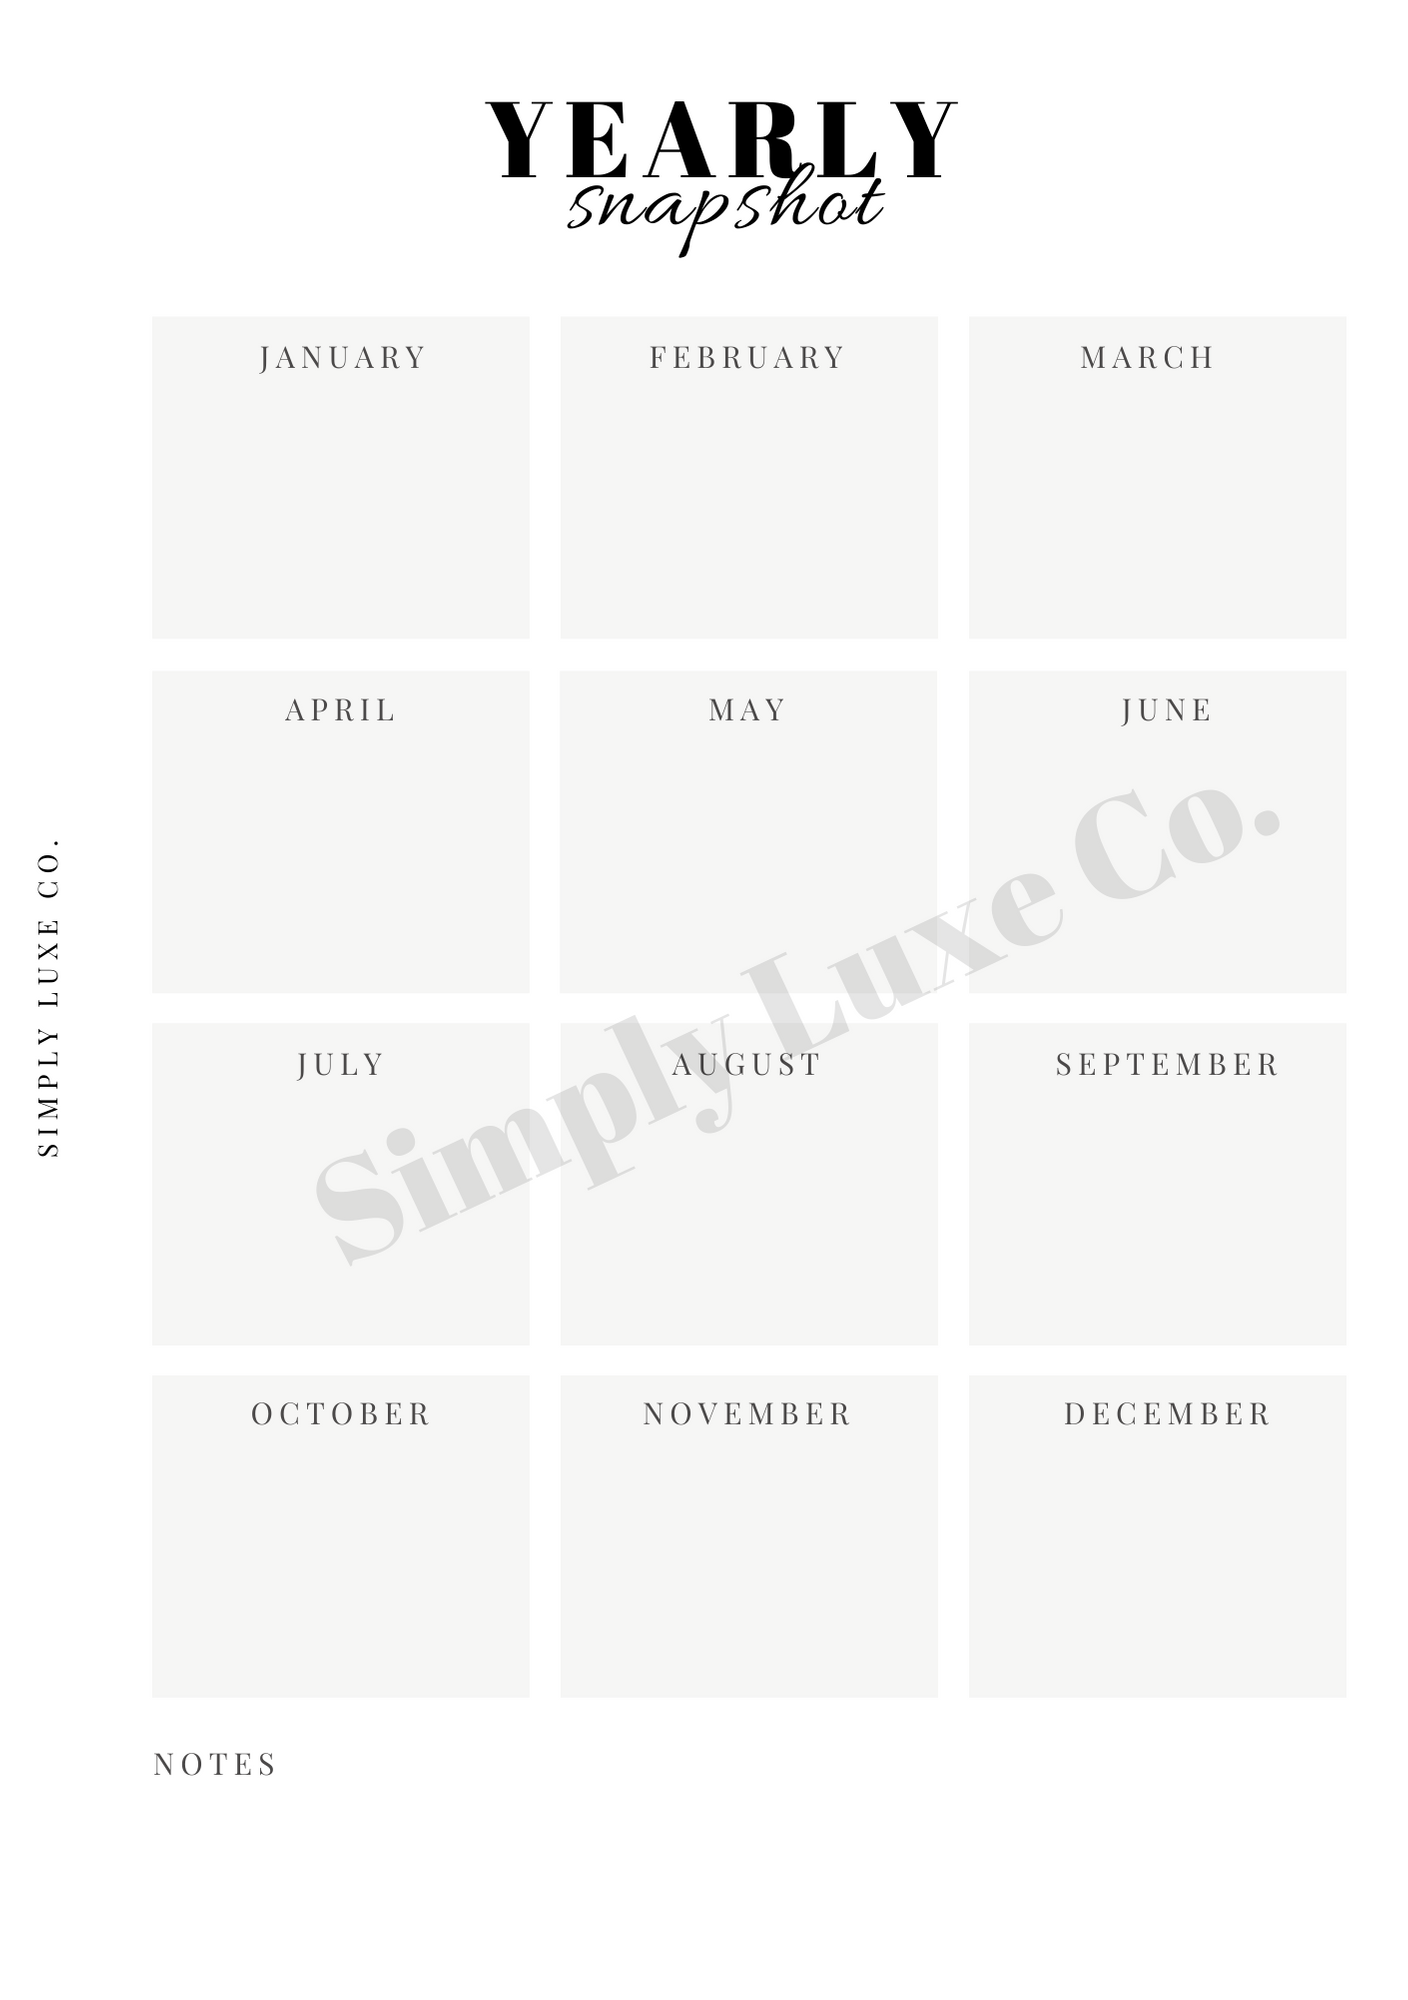 Yearly Snapshot Printable Insert - Available in 2 colors